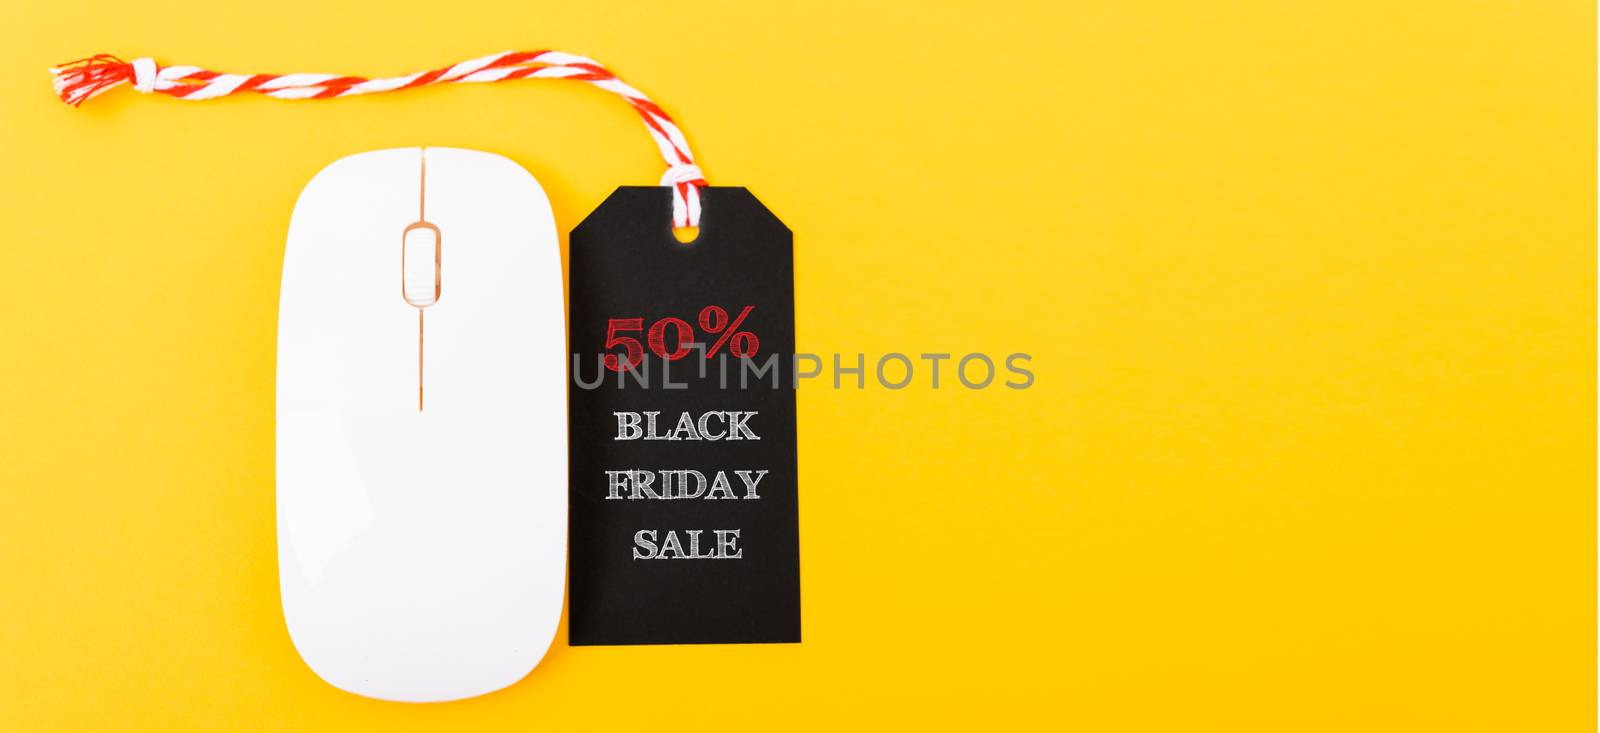 Online shopping Black Friday sale text black tag on white mouse by Sorapop